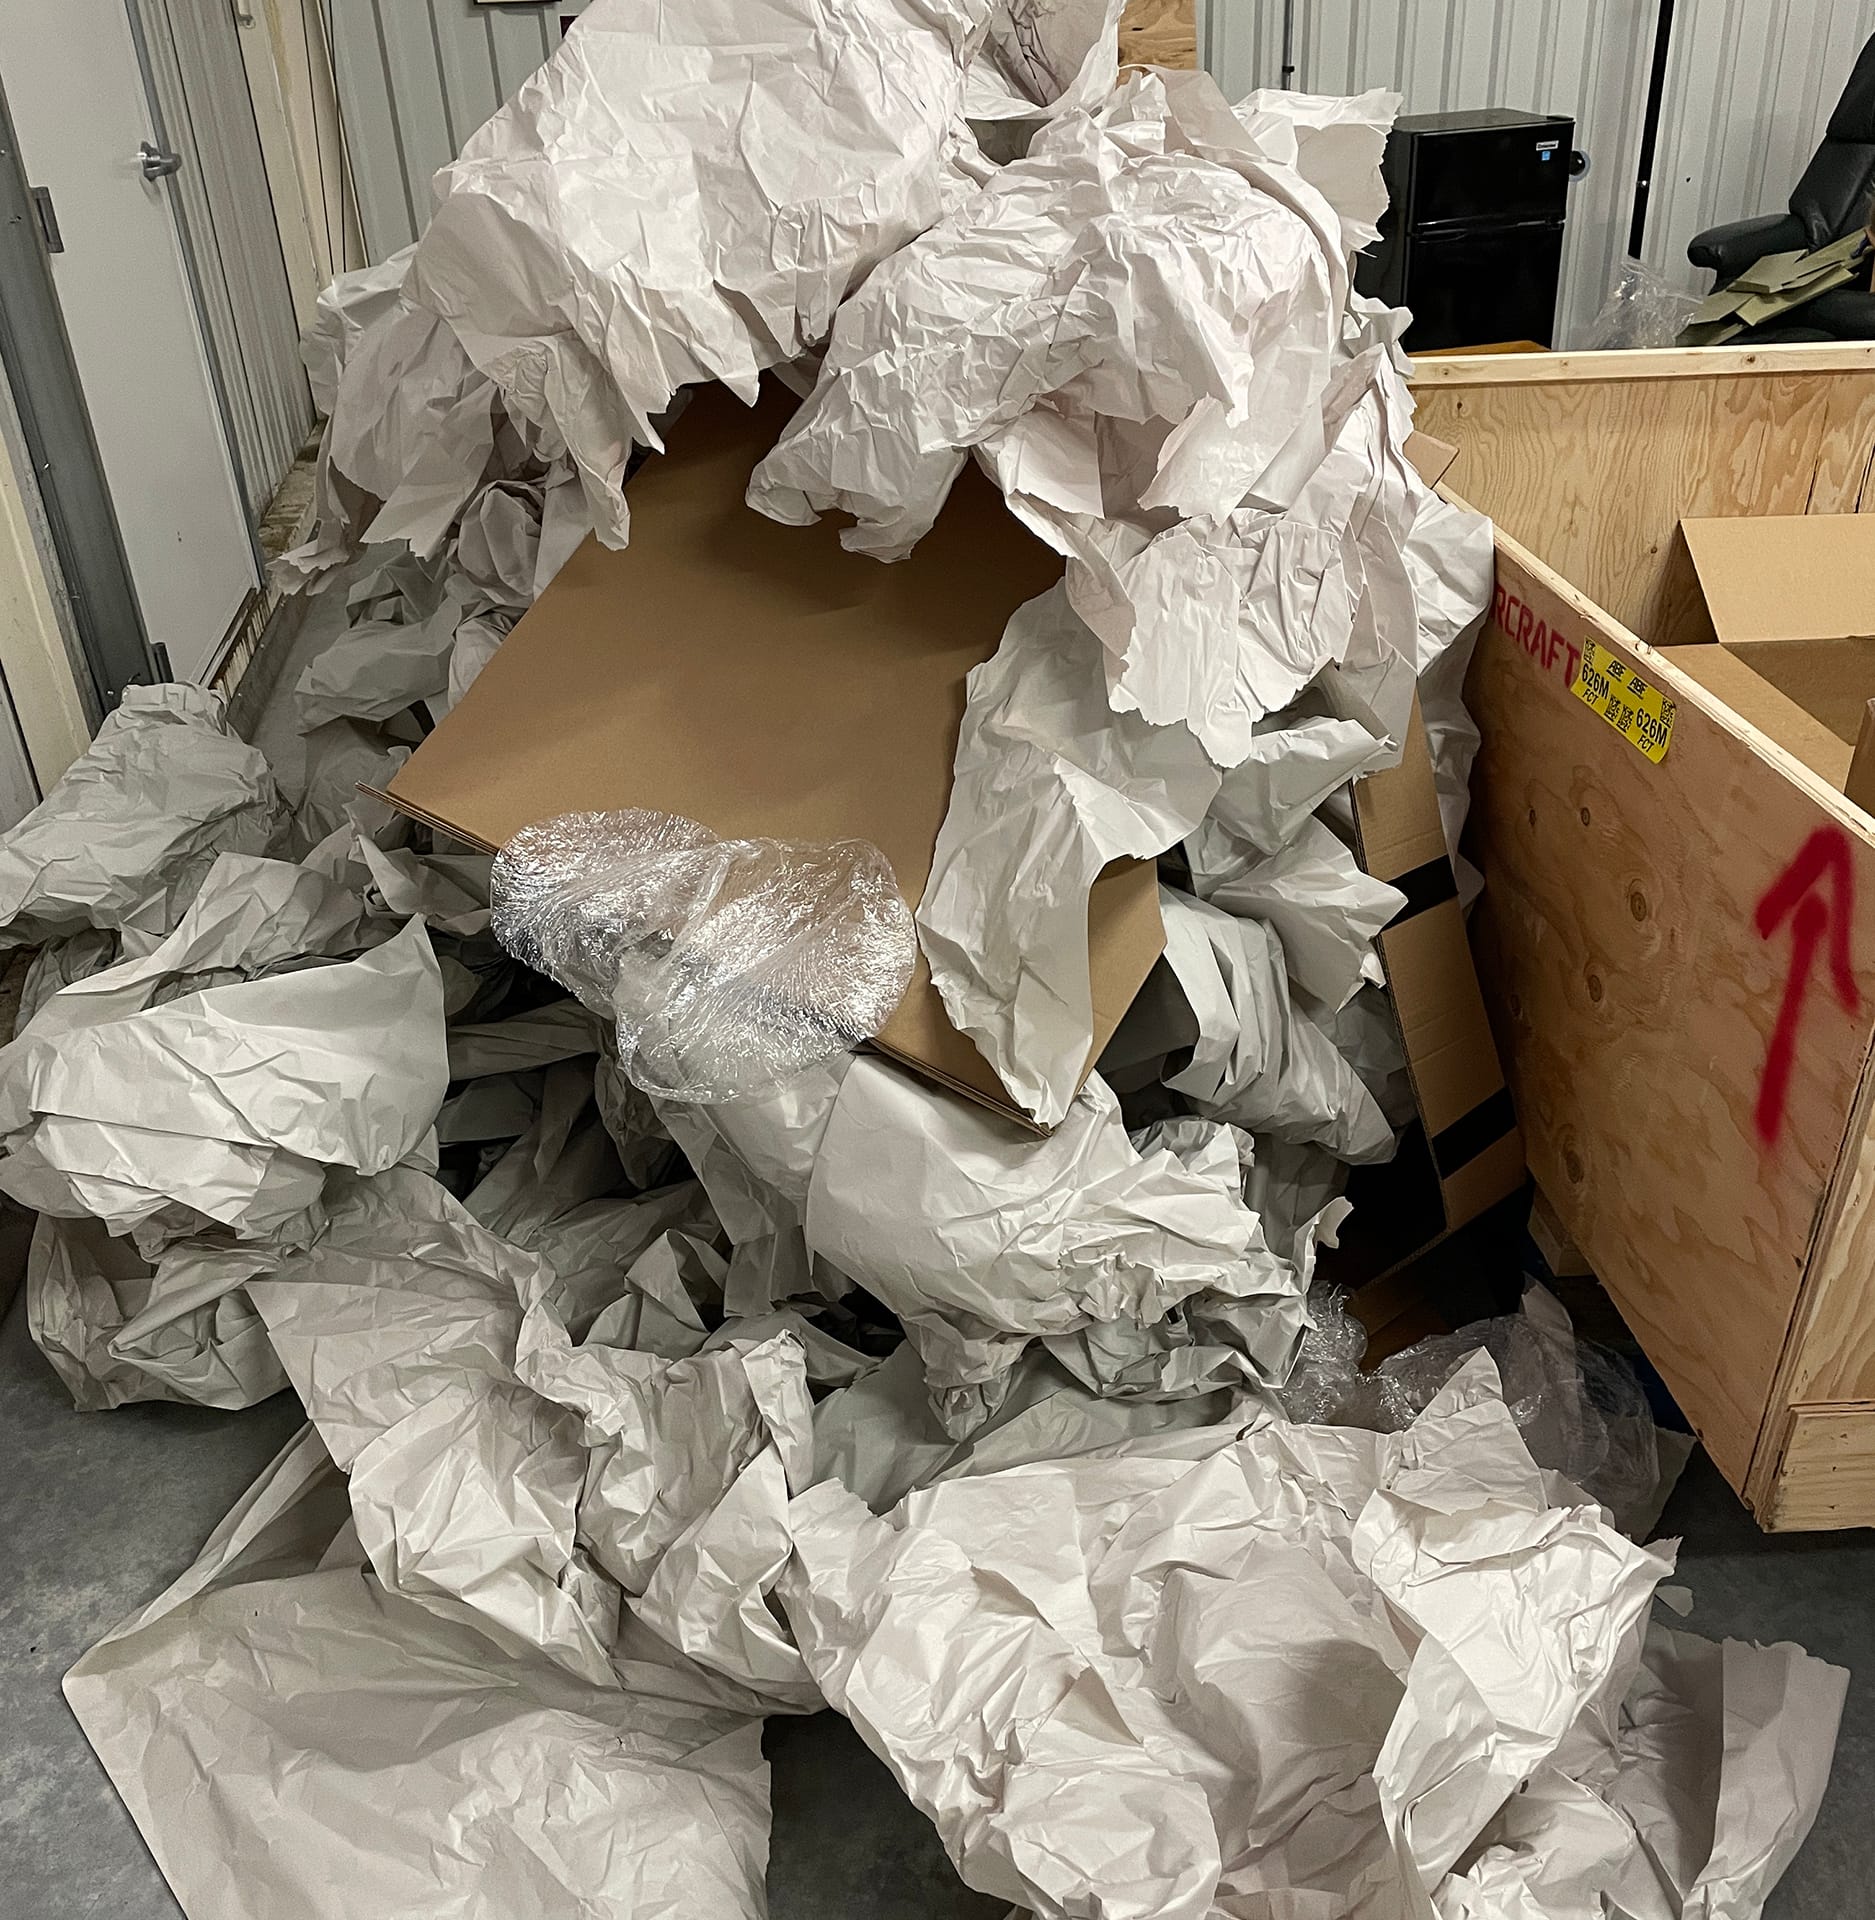 Pile of packing materials